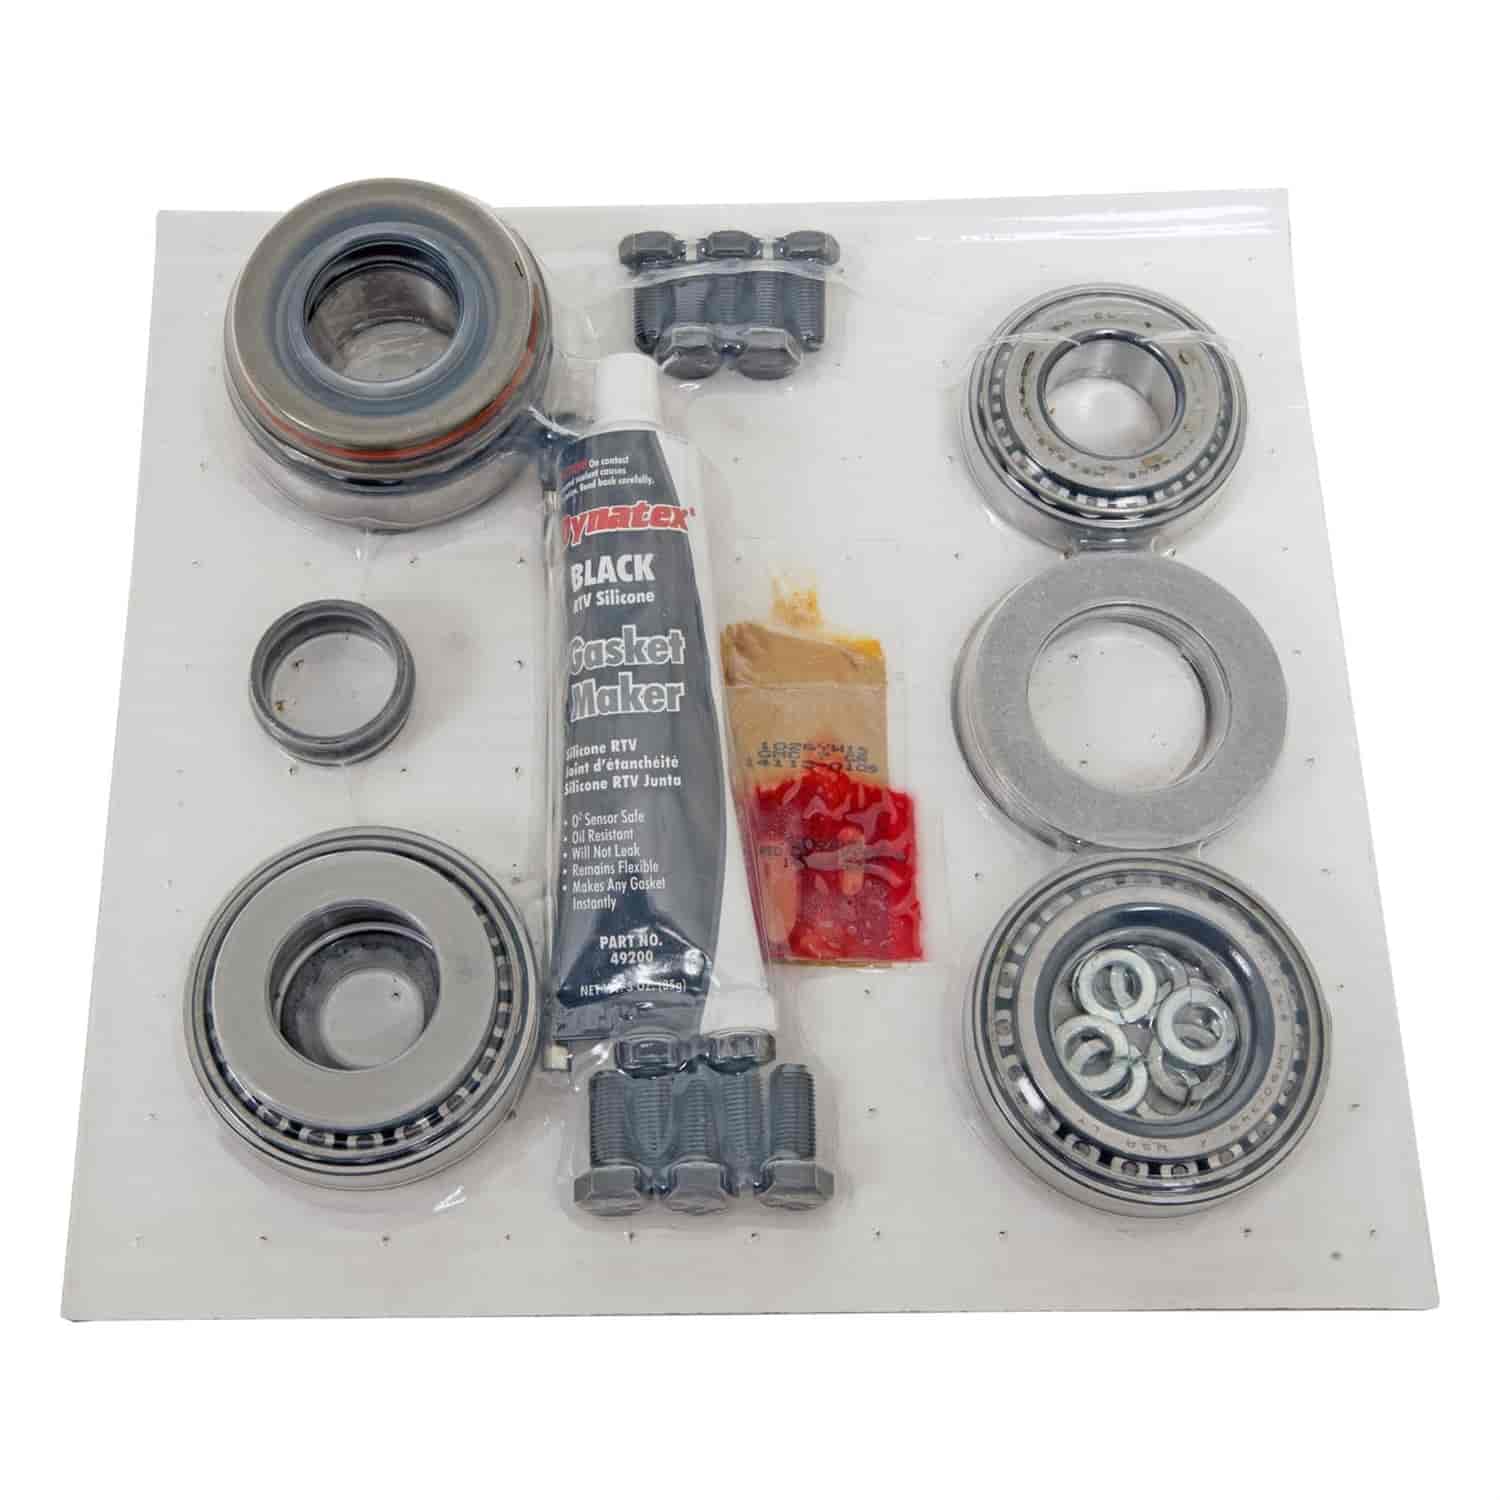 GM 8.2 special complete installation kit D1585 side bearings